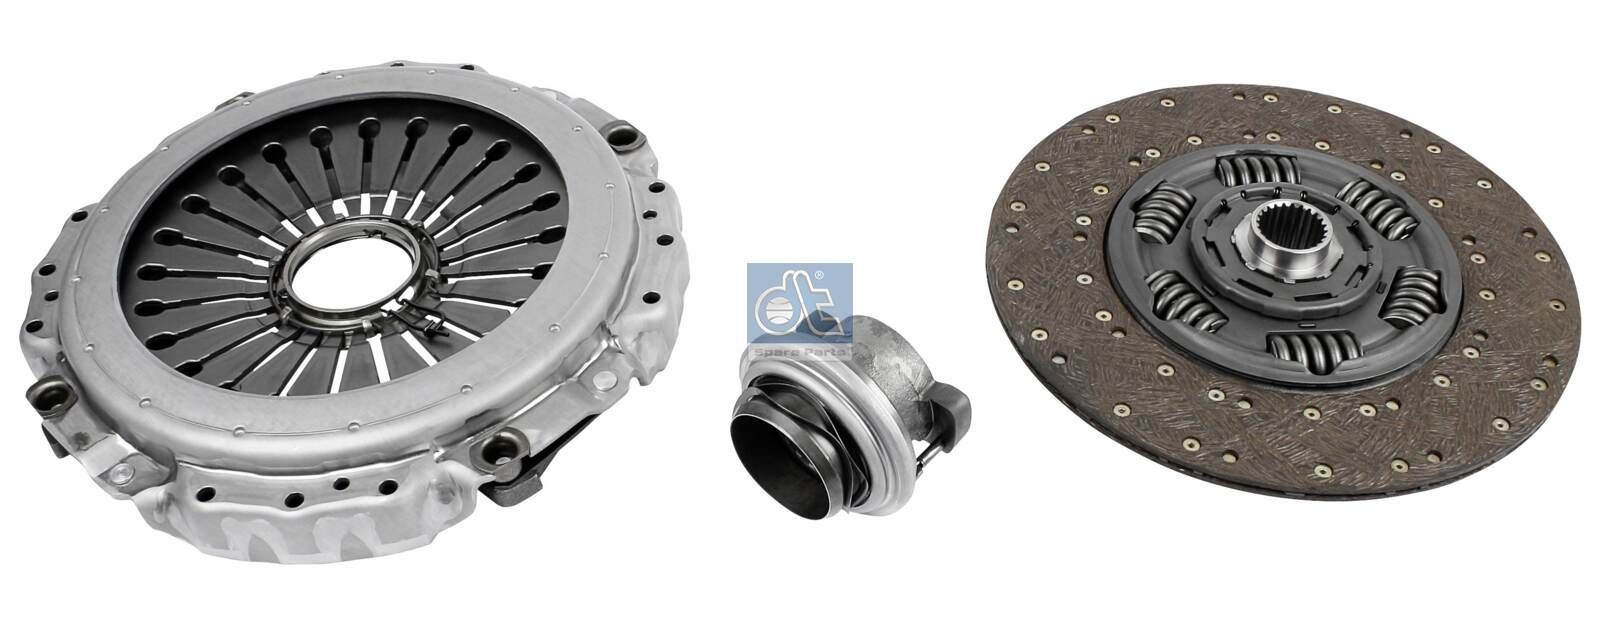 DT Spare Parts 430mm Ø: 430mm Clutch replacement kit 1.31383 buy